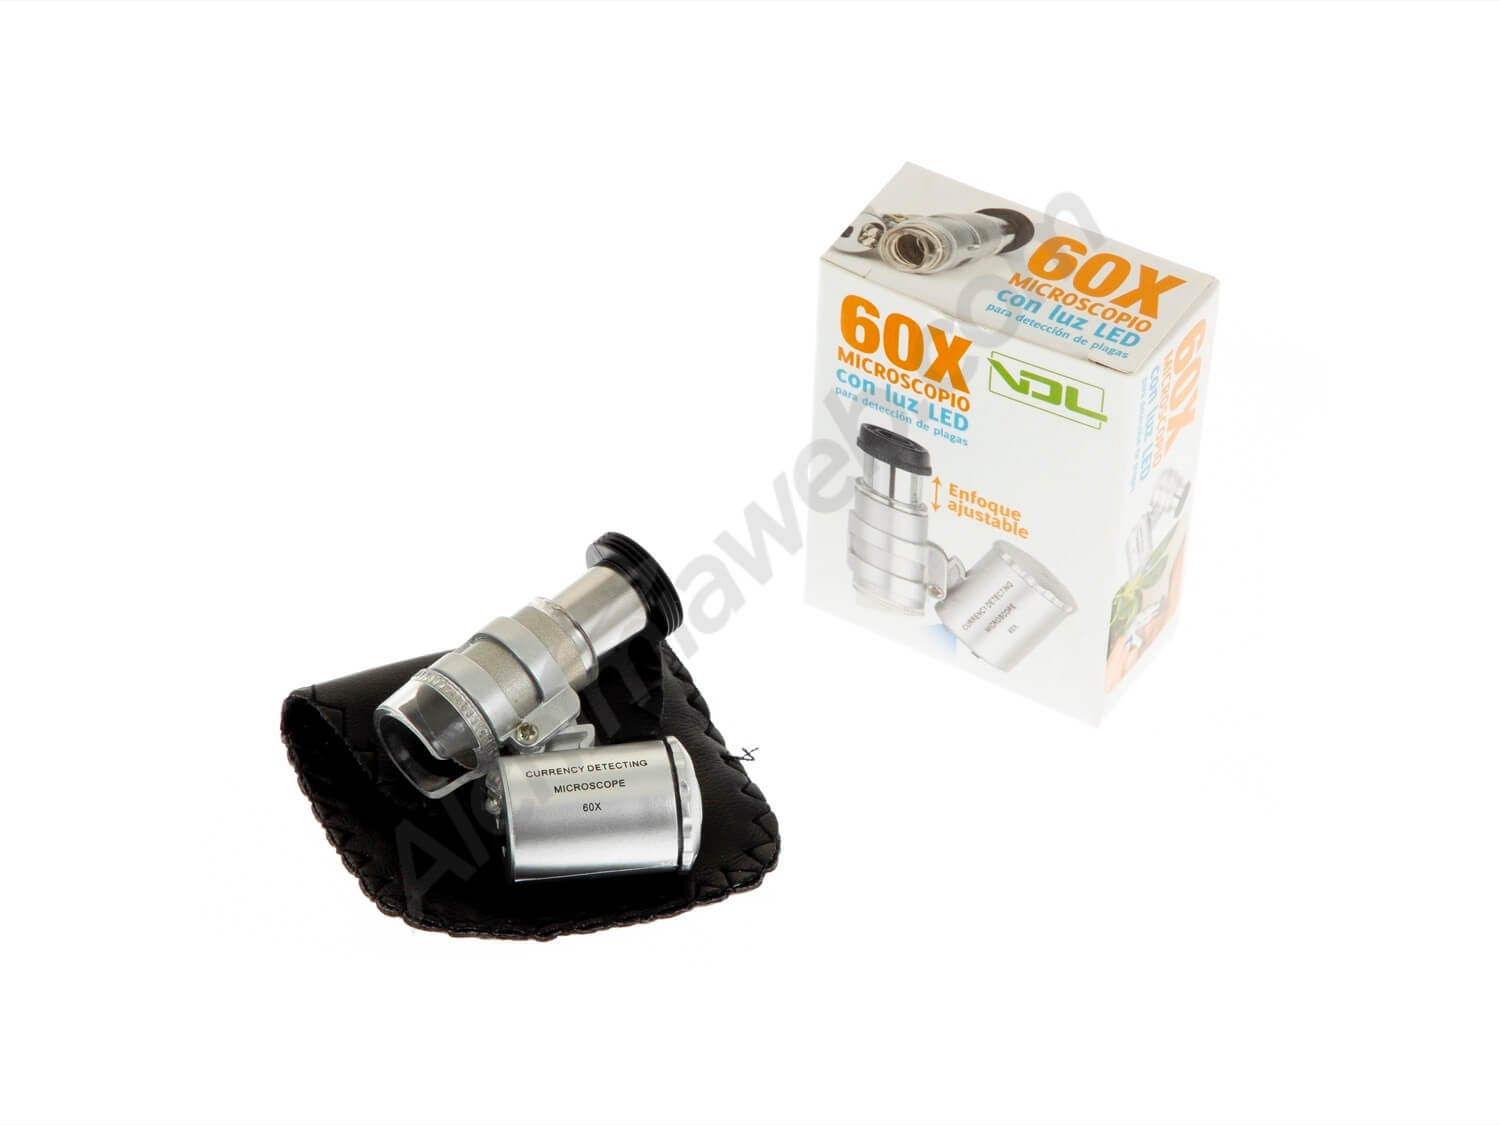 Microscope Grossissement X60-100 - Loupe Grossissante - Growshop